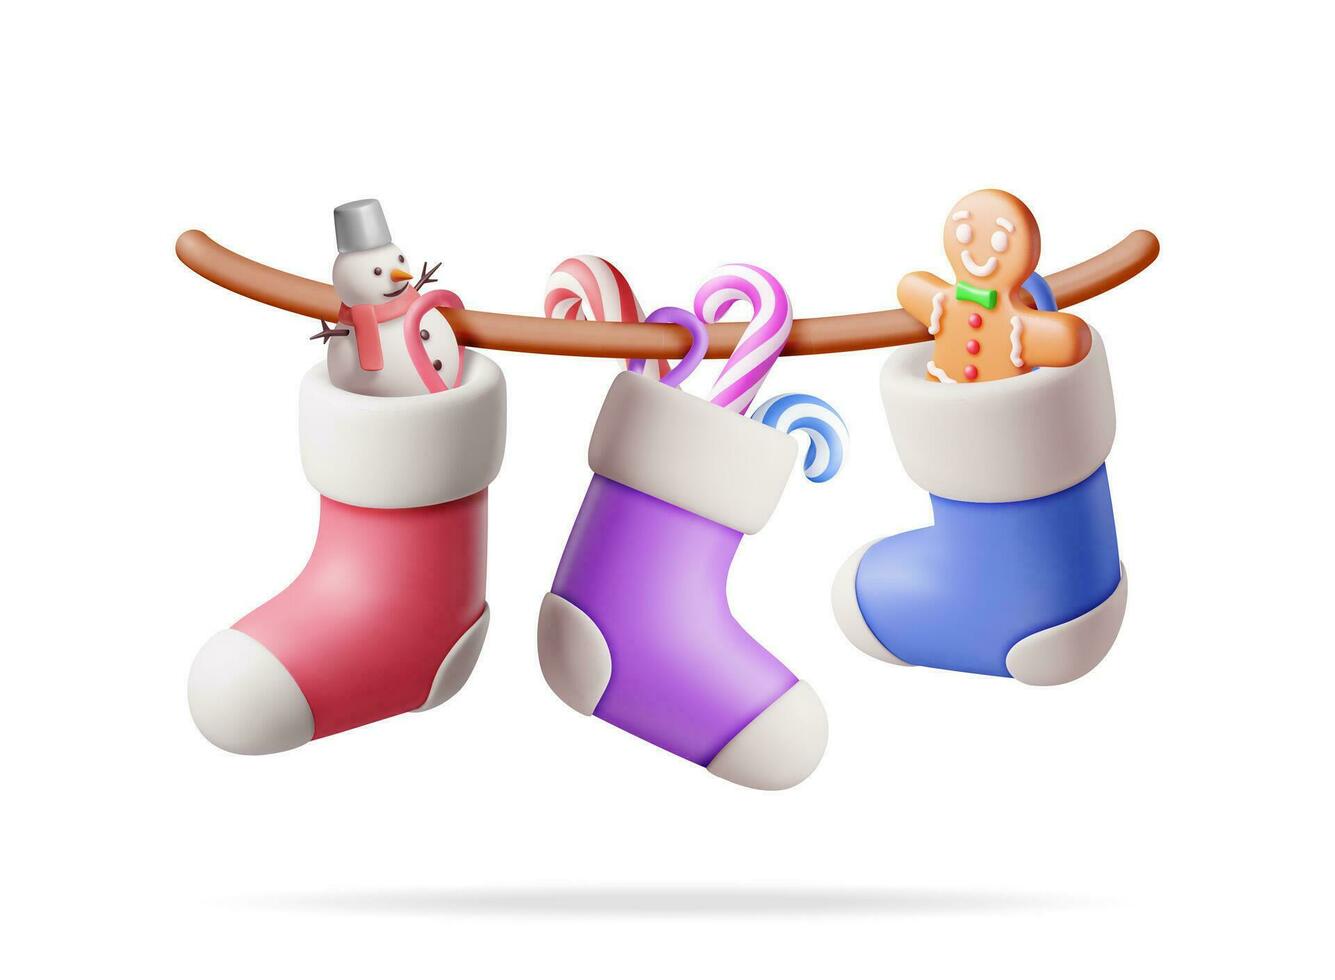 3D Christmas Stocking on Rope, Color Sock. Render Christmas Cloth Socks with Candycane, Snowman, Gingerbread Man. Hanging Holiday Decorations. New Year Xmas Celebration. Realistic Vector Illustration